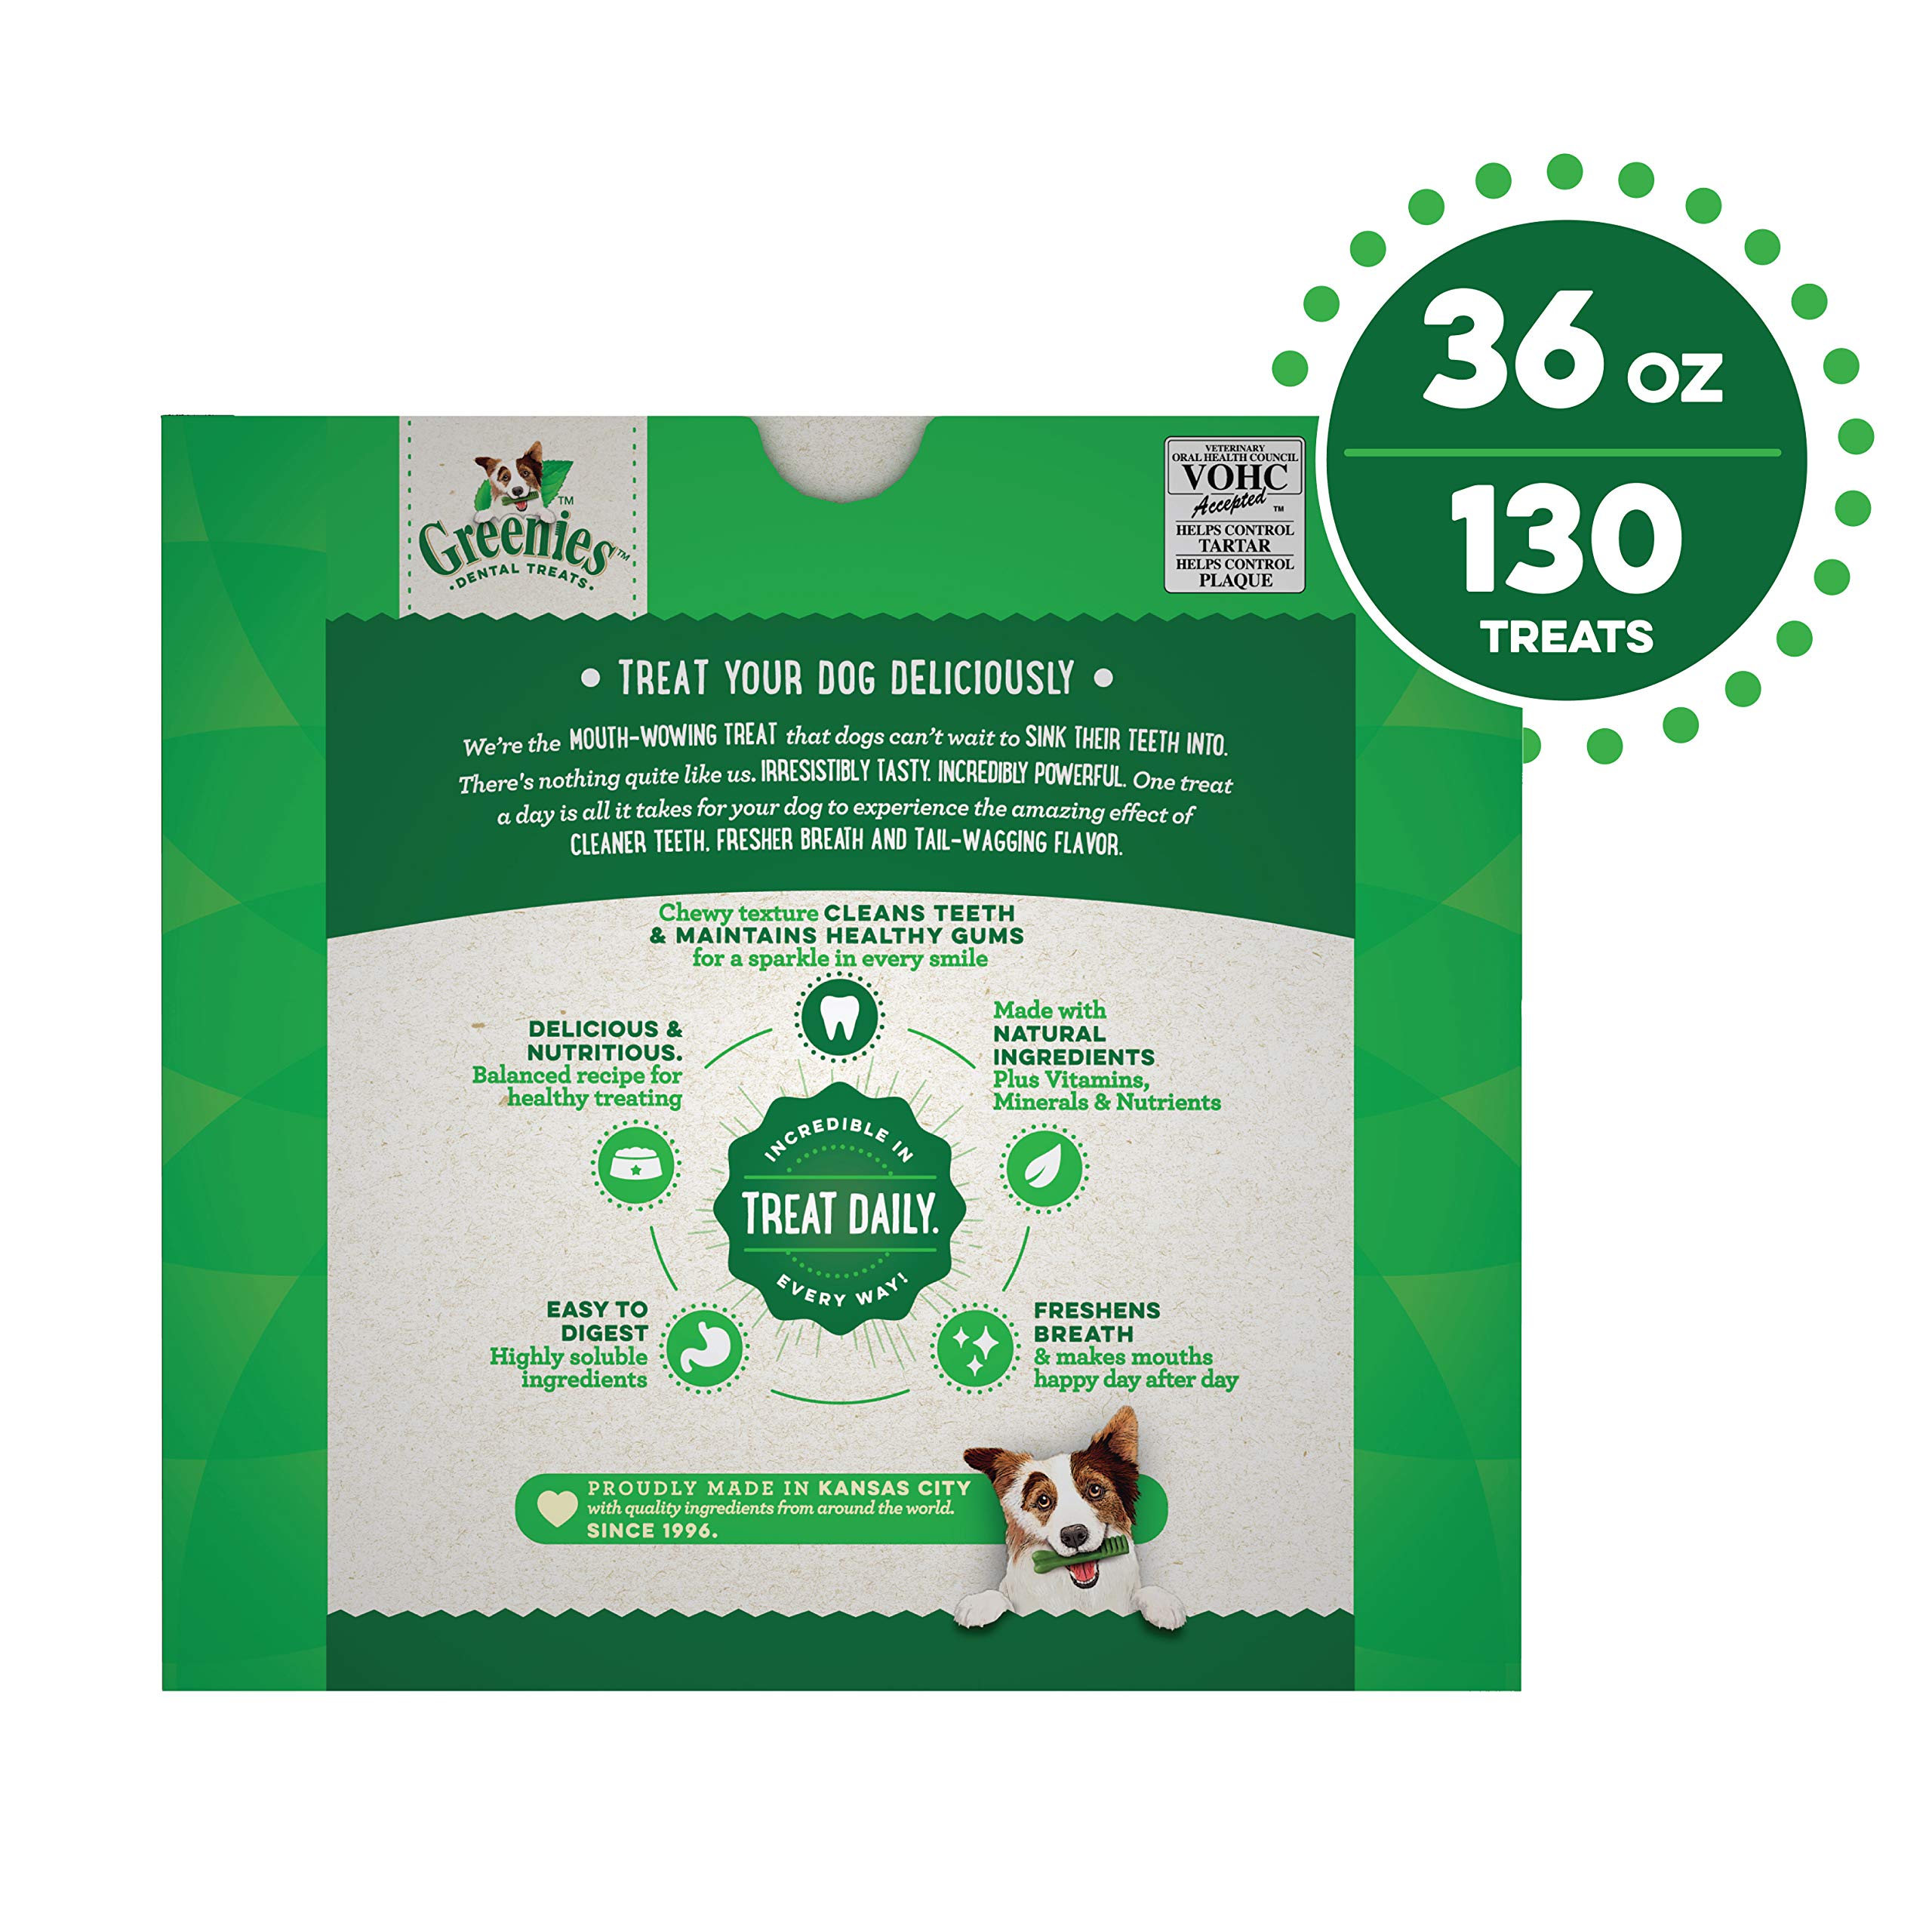 Greenies Original Teenie Natural Dental Dog Treats (5-15 lb. Dogs) 130 count and other various count sizes (larger dog sizes as well) - $19.61 ($19.33 w/5%)